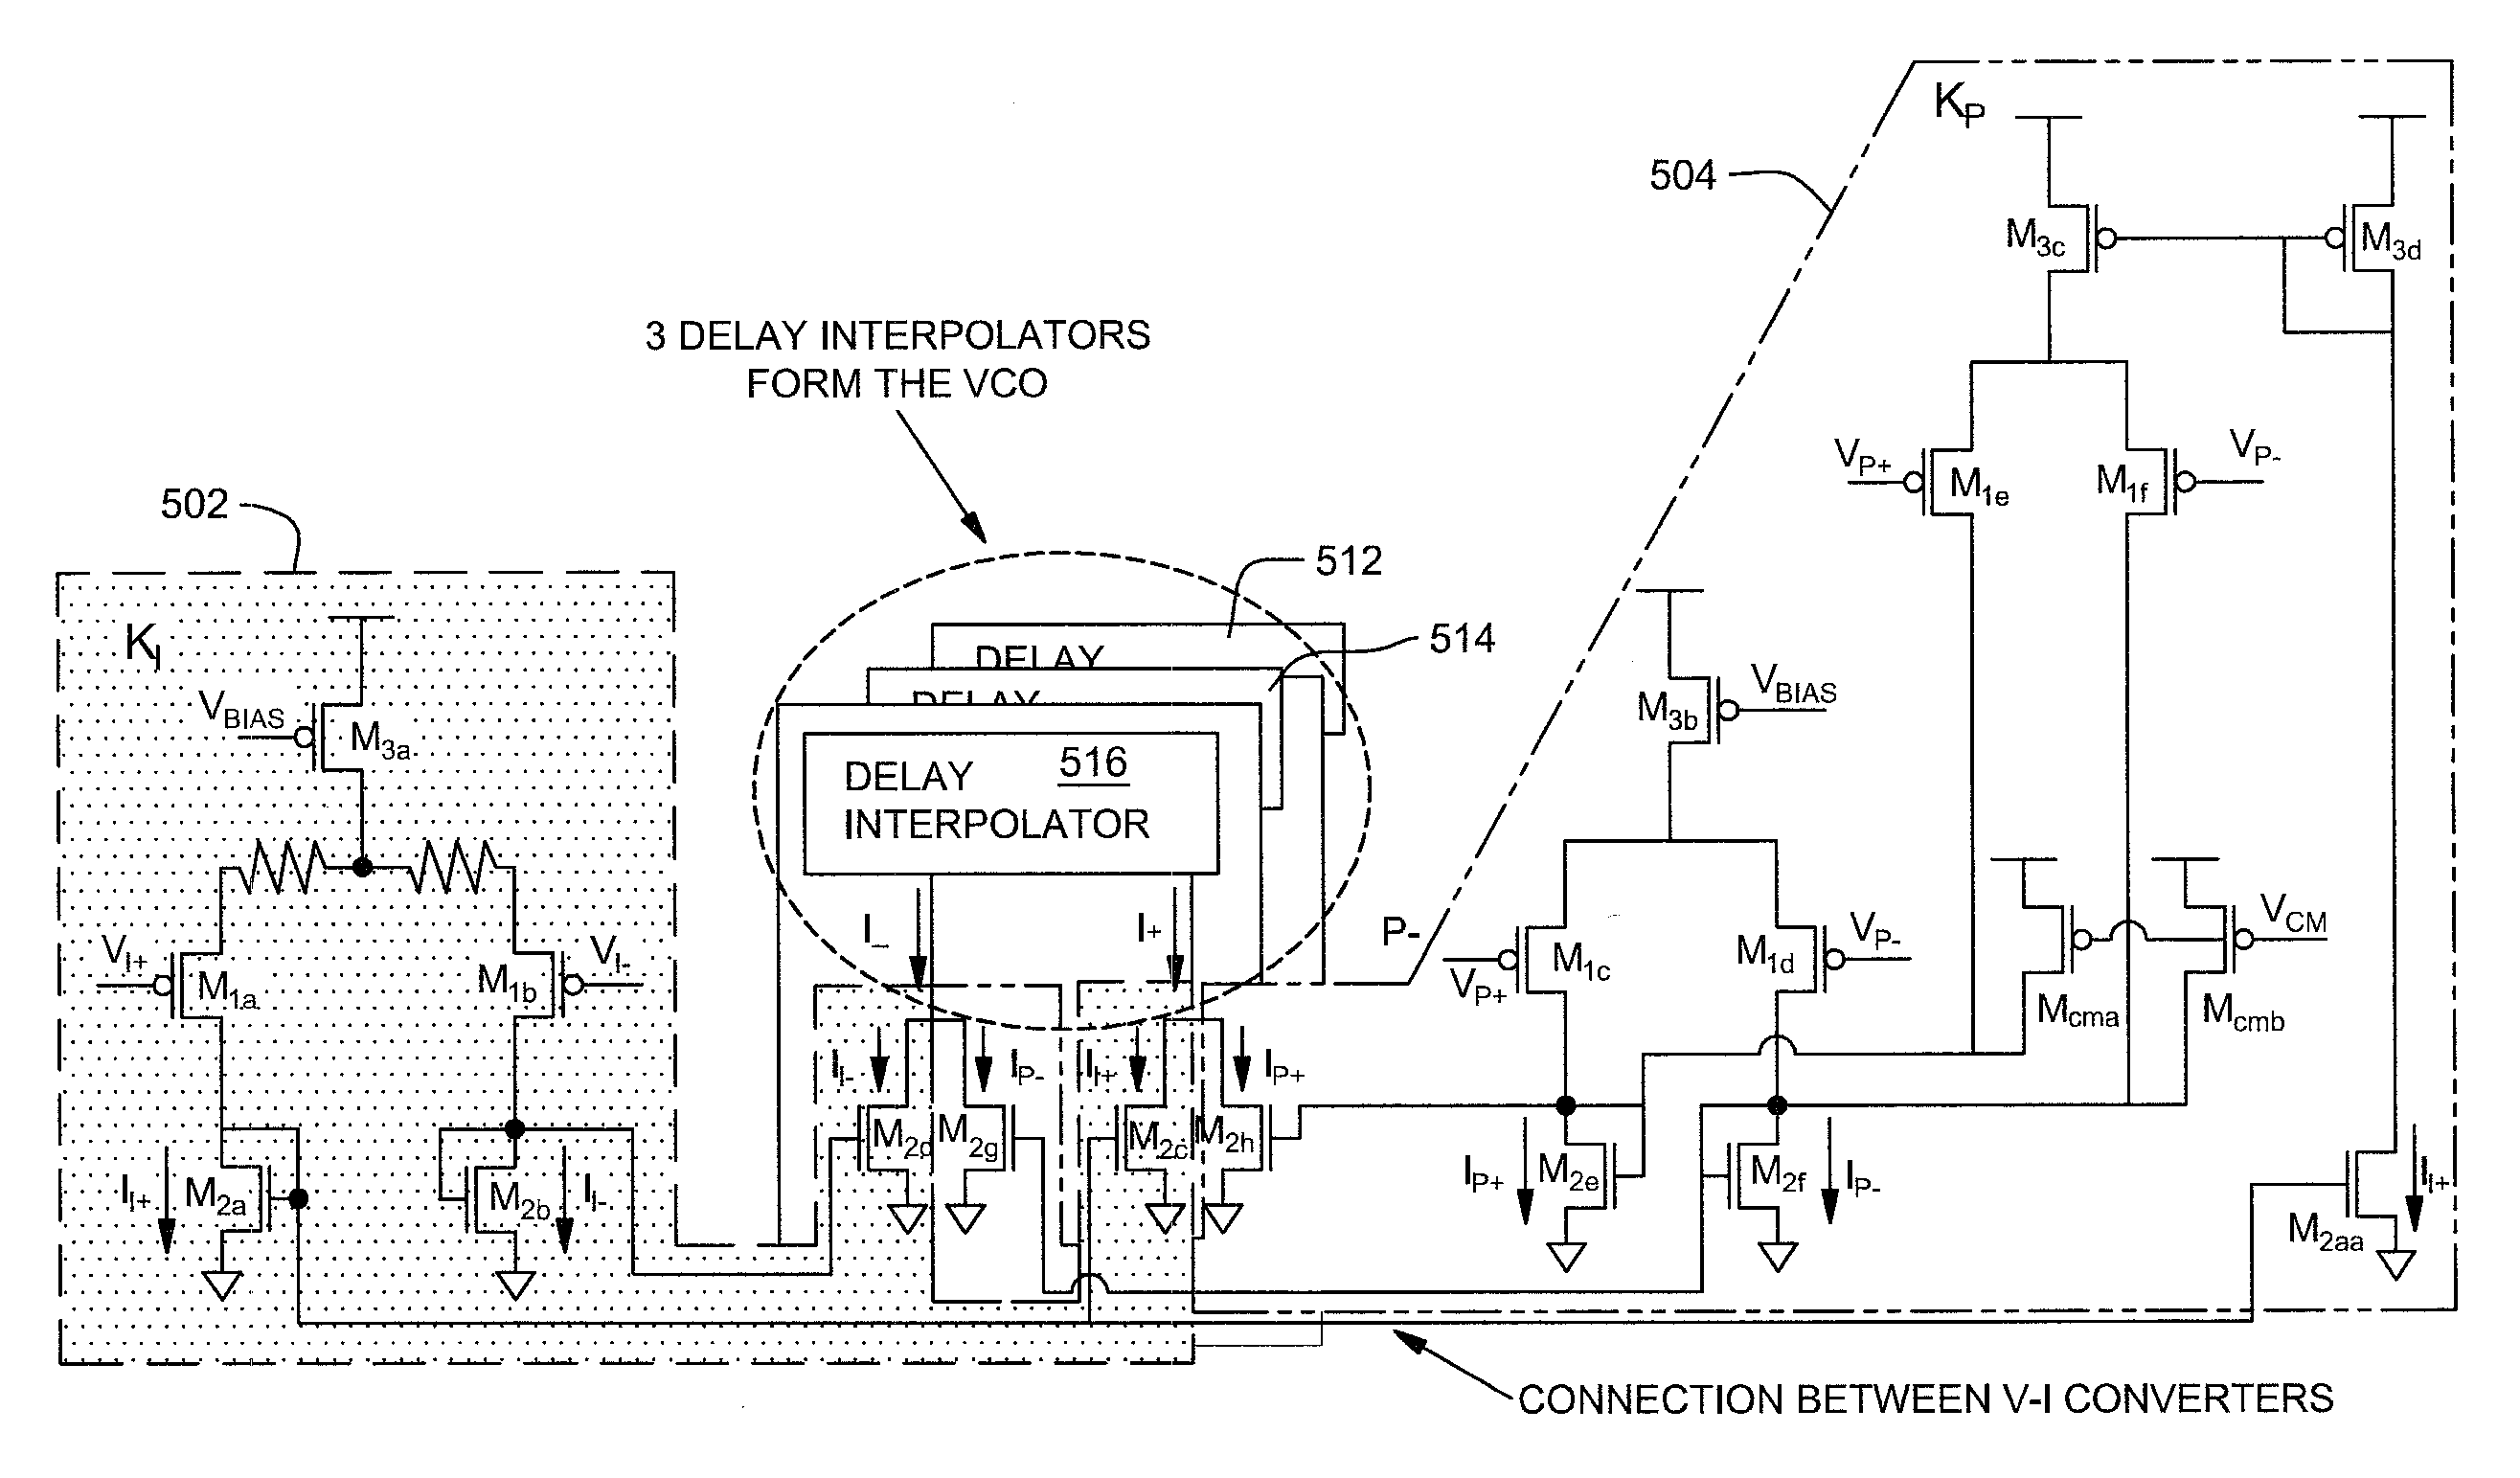 Architecture for maintaining constant voltage-controlled oscillator gain